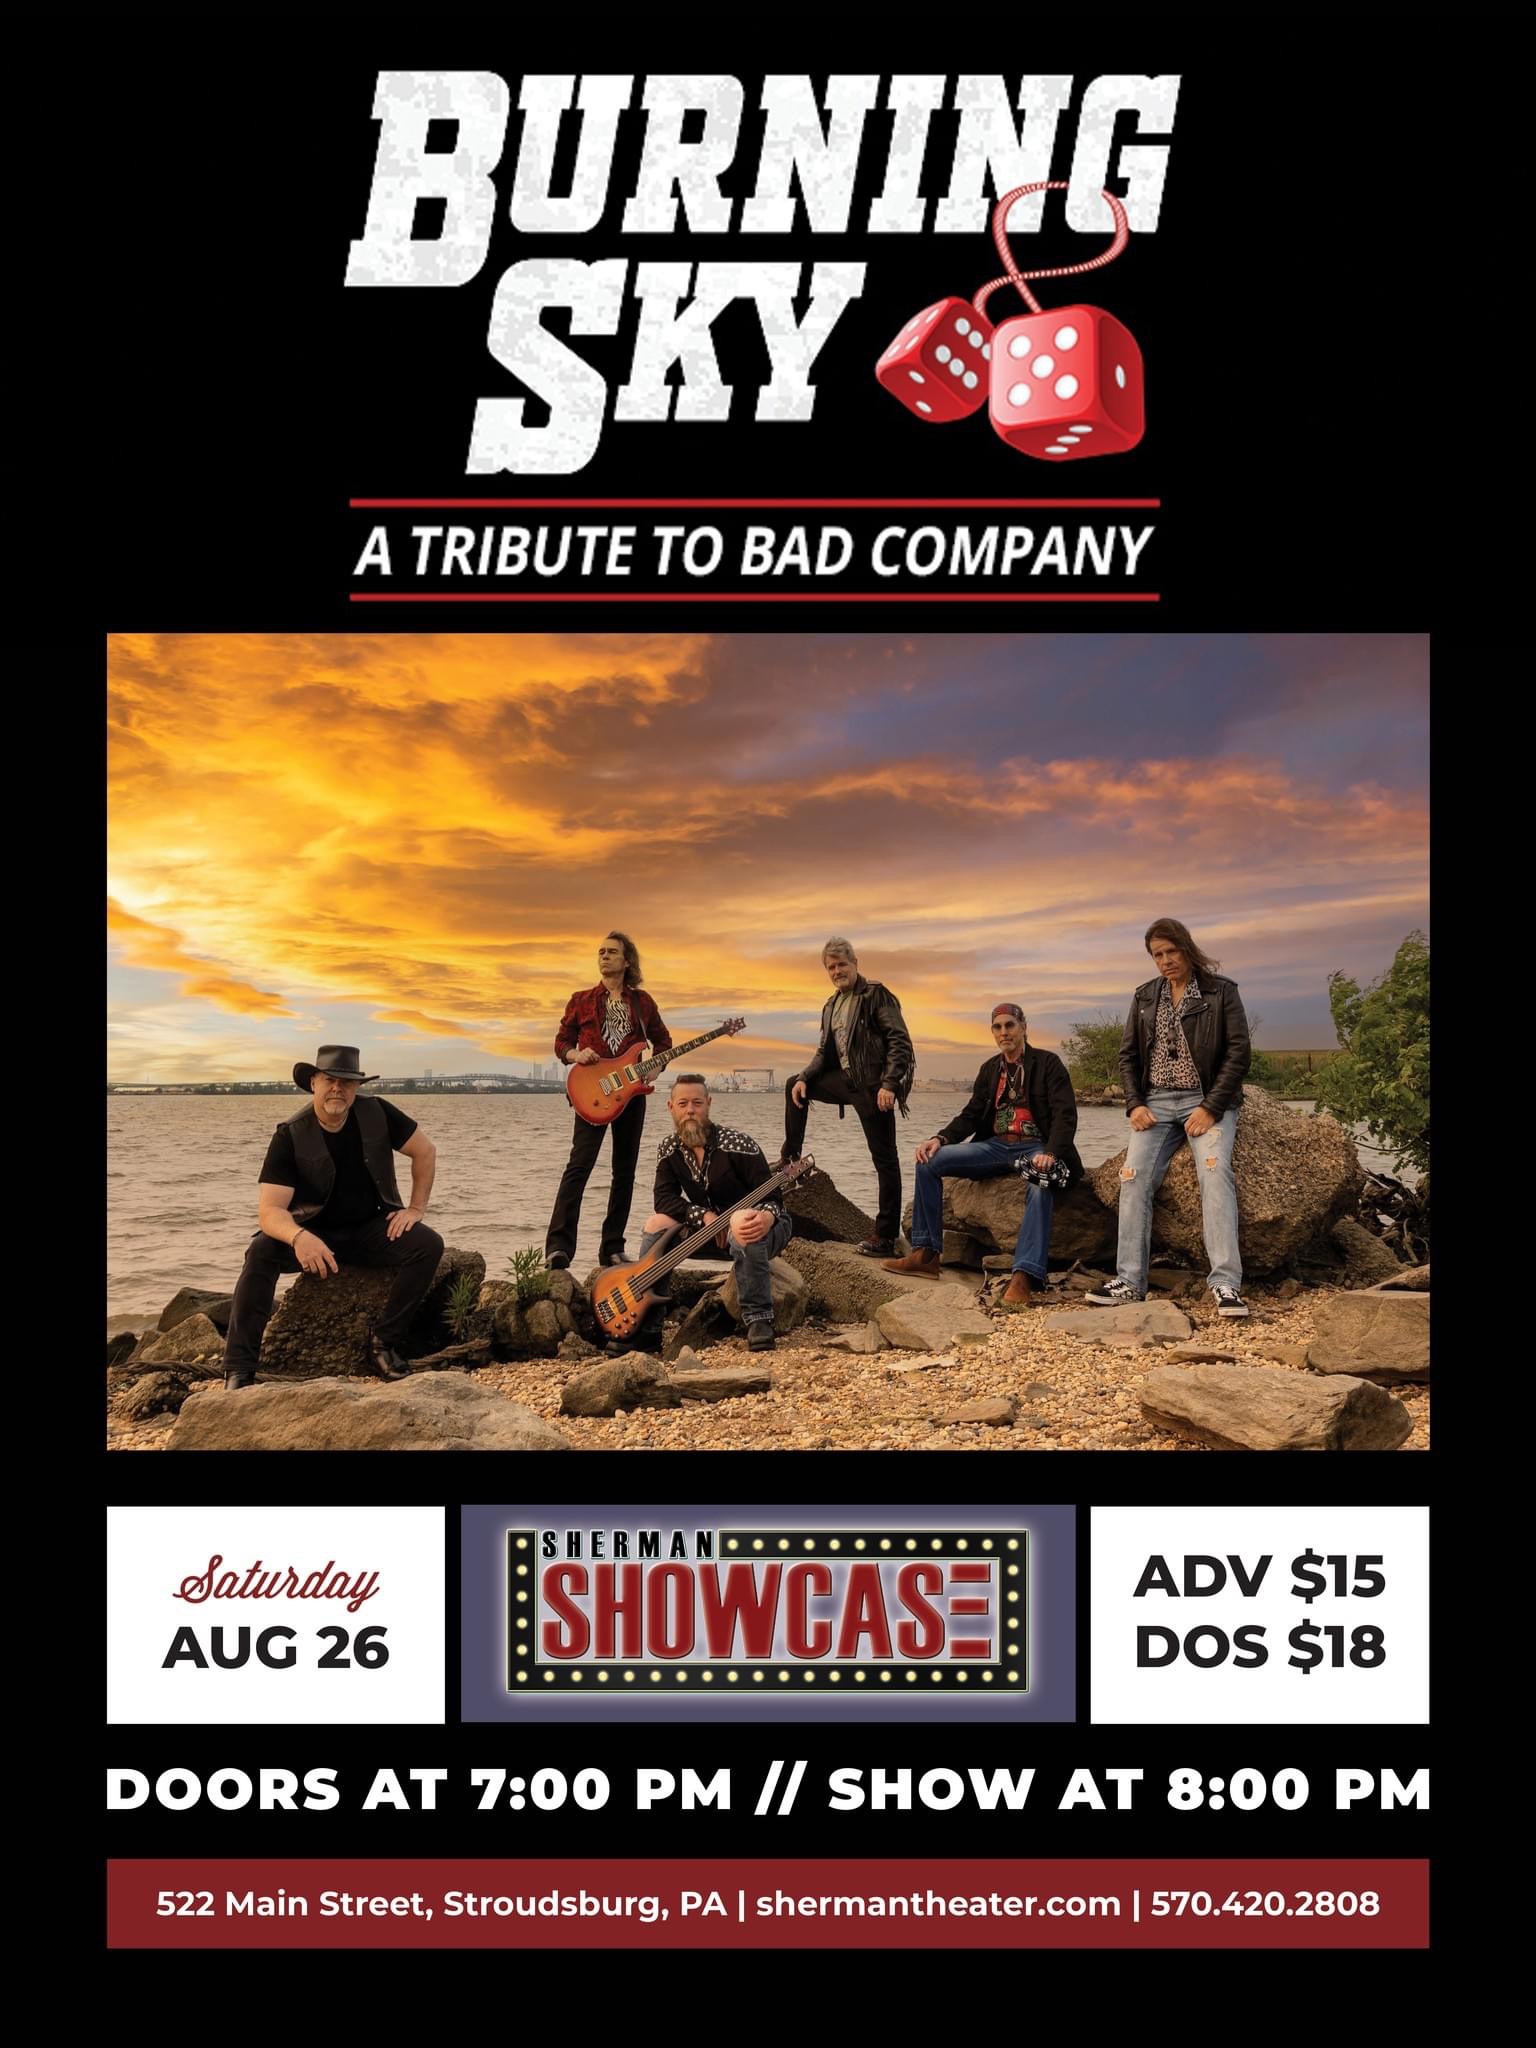 Burning Sky Band at The Sherman Theater Aug 26